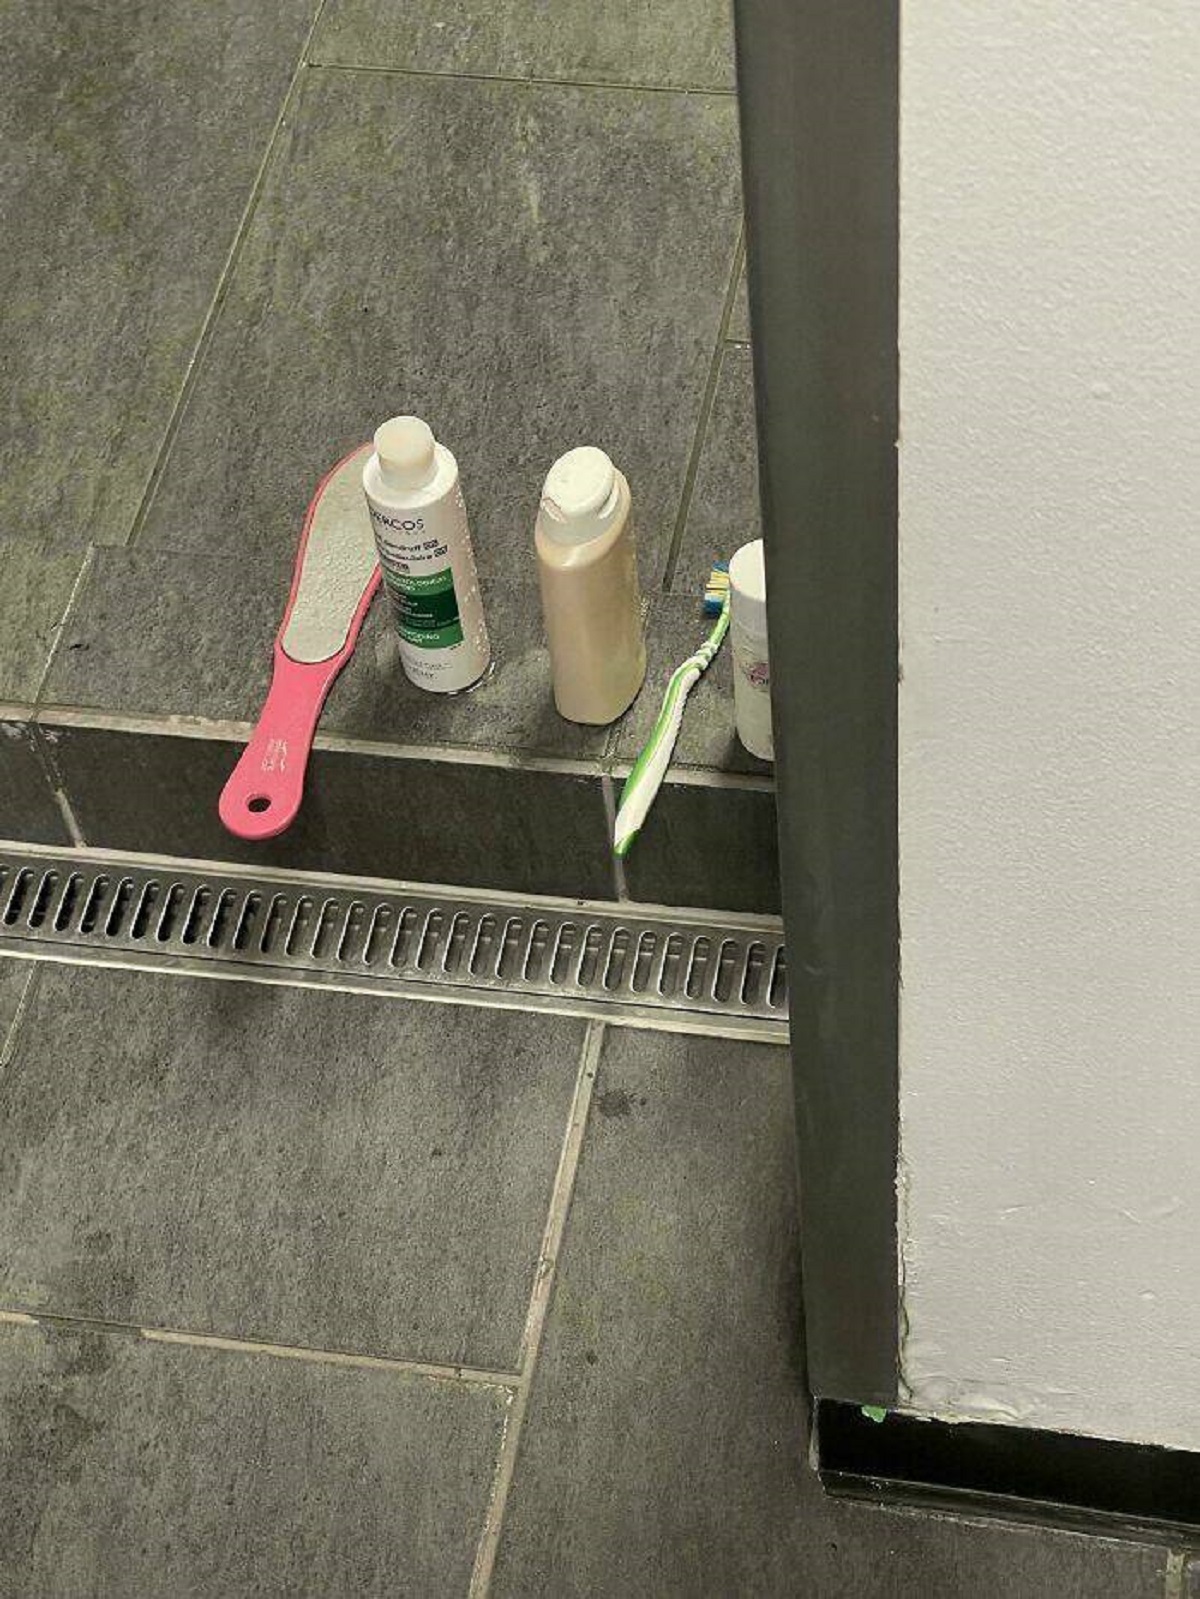 "Dude Placed His Toothbrush On The Step Into The Gym Shower"